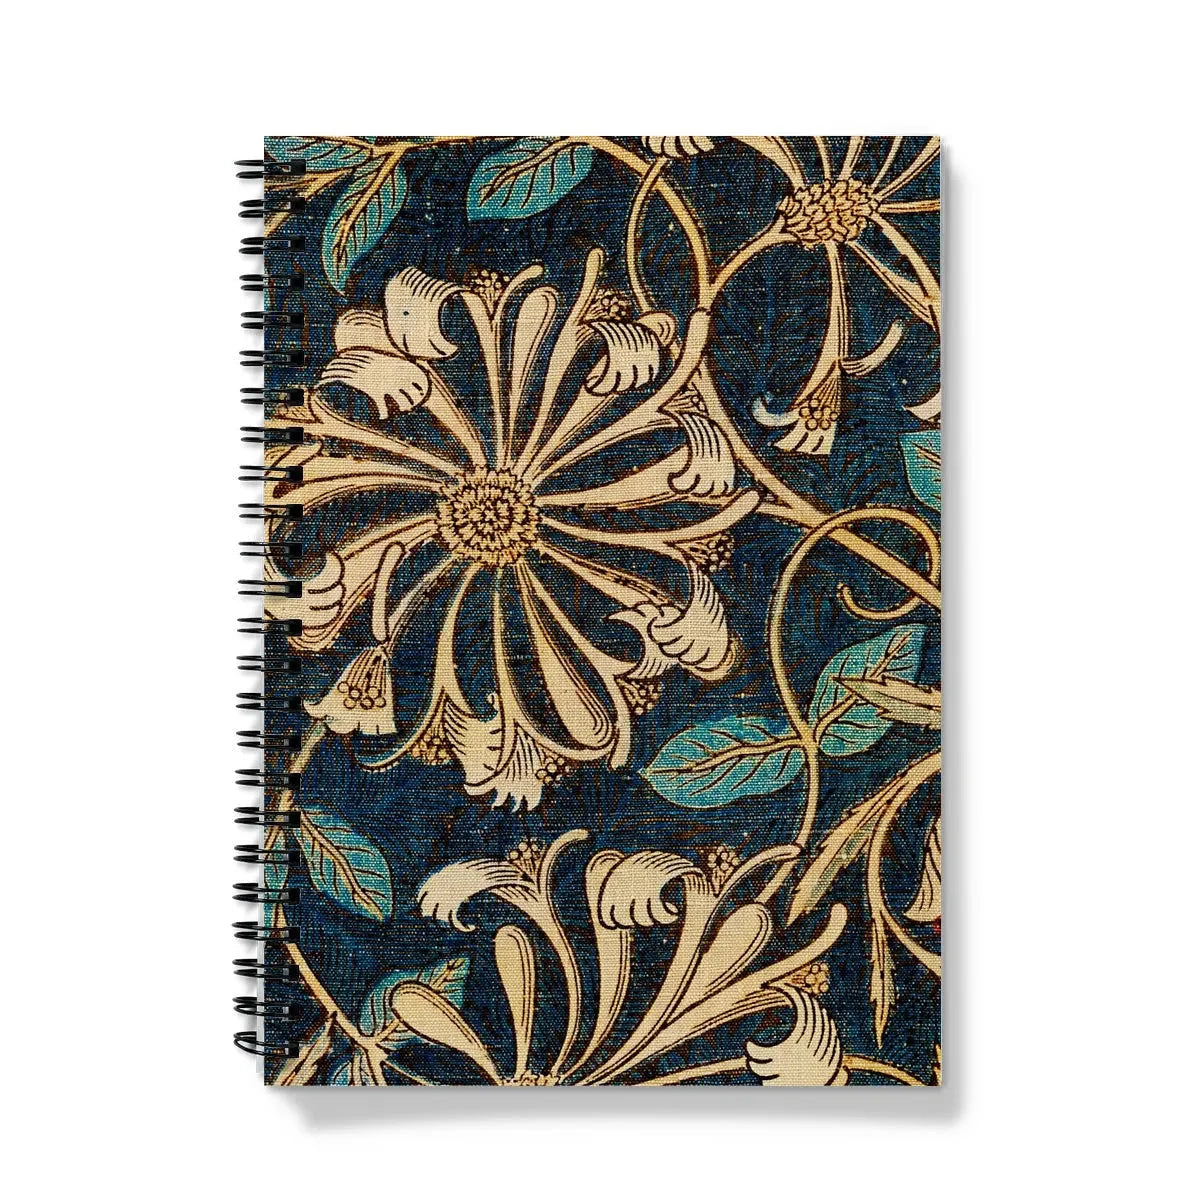 Honeysuckle 3 By William Morris Notebook - A5 - Graph Paper - Notebooks & Notepads - Aesthetic Art